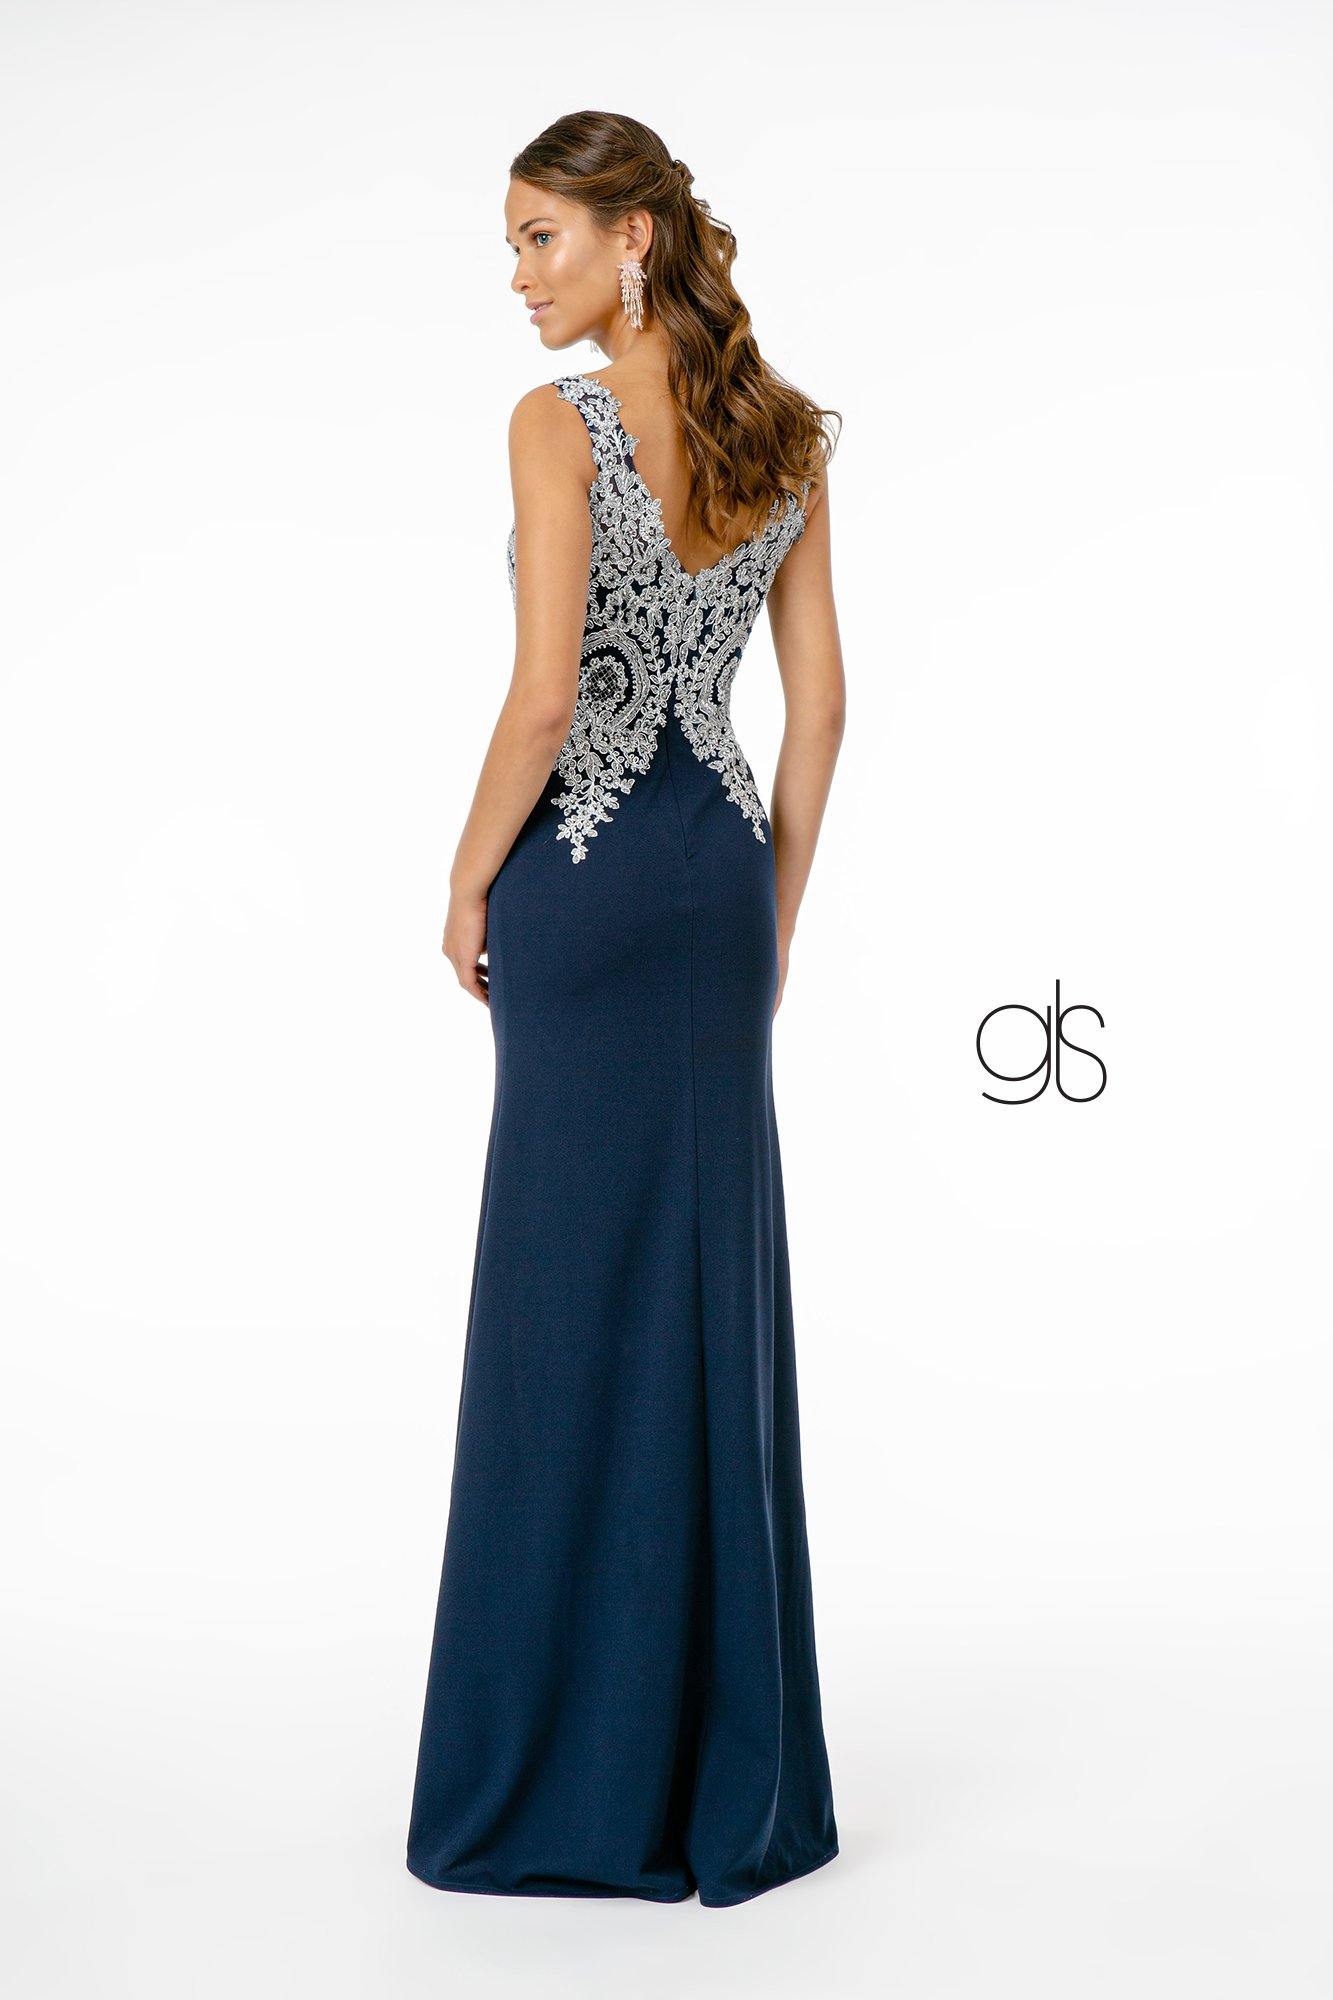 Sleeveless Long Prom Dress Sale - The Dress Outlet